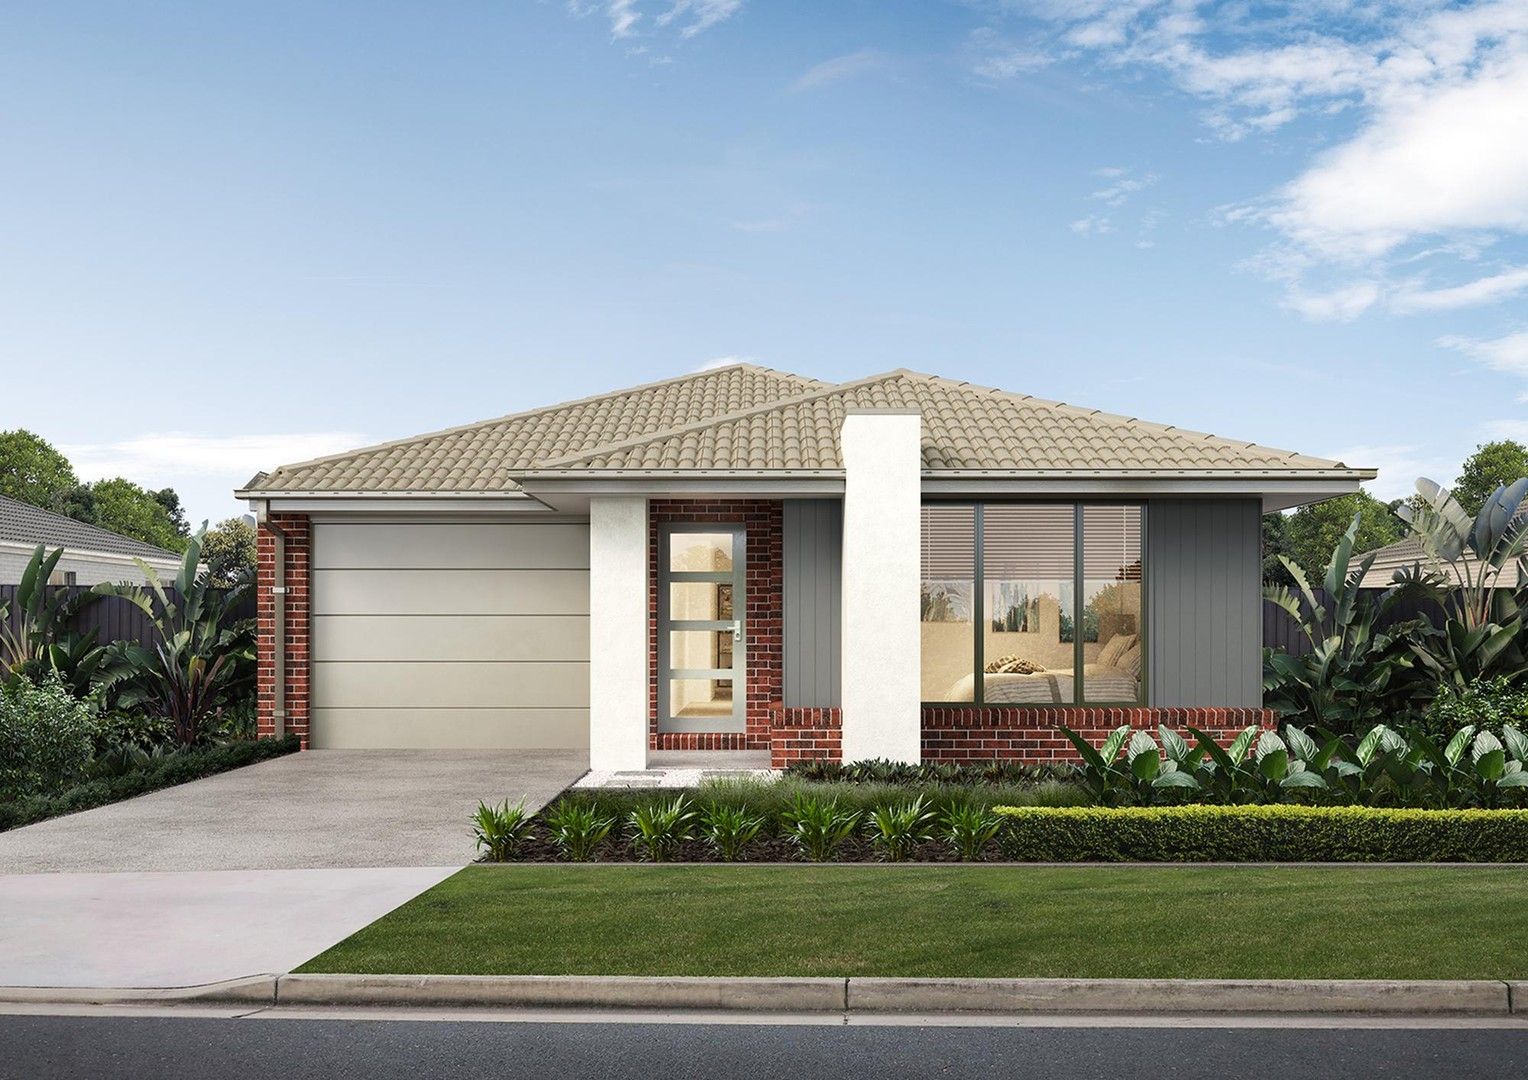 3 bedrooms New House & Land in 3651 Aspire Estate FRASER RISE VIC, 3336